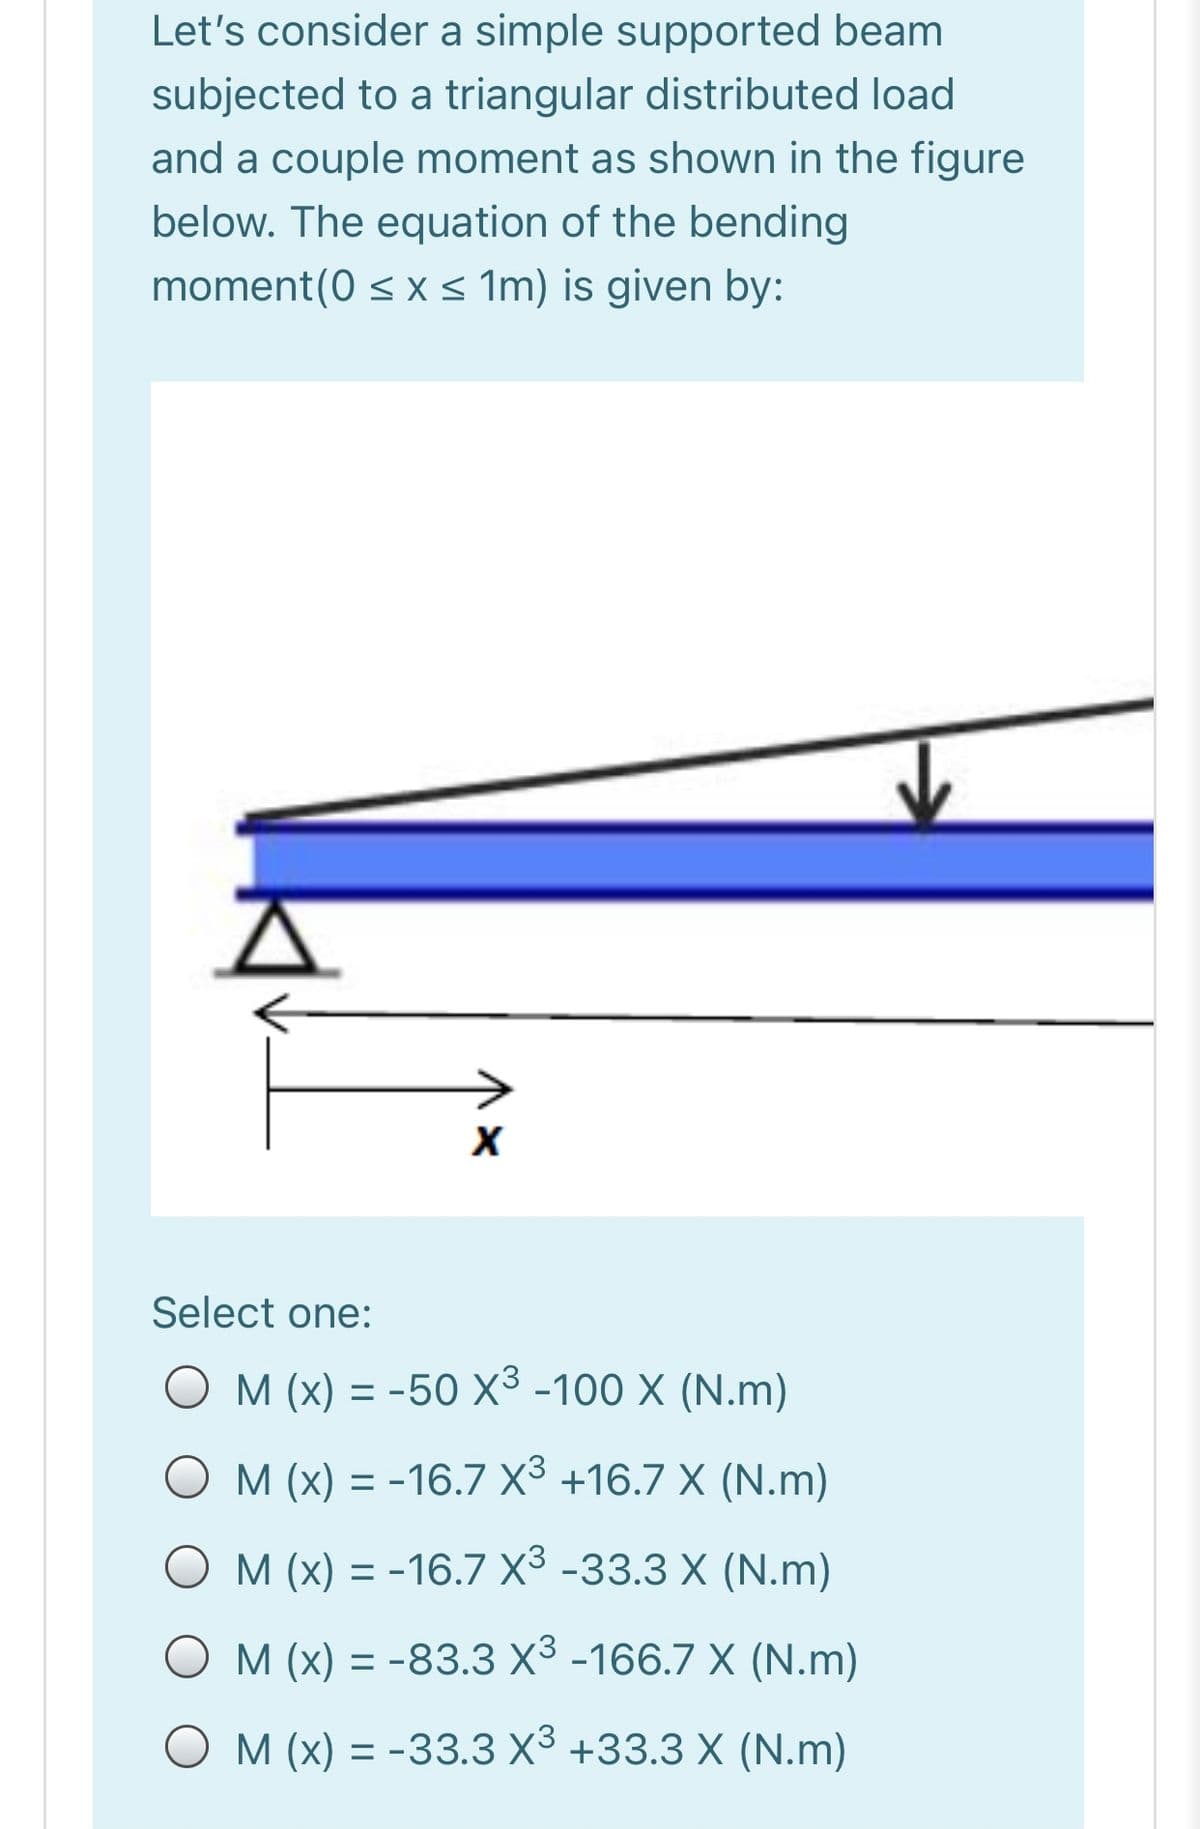 Let's consider a simple supported beam
subjected to a triangular distributed load
and a couple moment as shown in the figure
below. The equation of the bending
moment(0 < x < Im) is given by:
Select one:
M (x) = -50 X³ -100 X (N.m)
O M (x) = -16.7 X3 +16.7 X (N.m)
O M (x) = -16.7 X3 -33.3 X (N.m)
%3D
O M (x) = -83.3 X3 -166.7 X (N.m)
%3D
O M (x) = -33.3 X3 +33.3 X (N.m)
